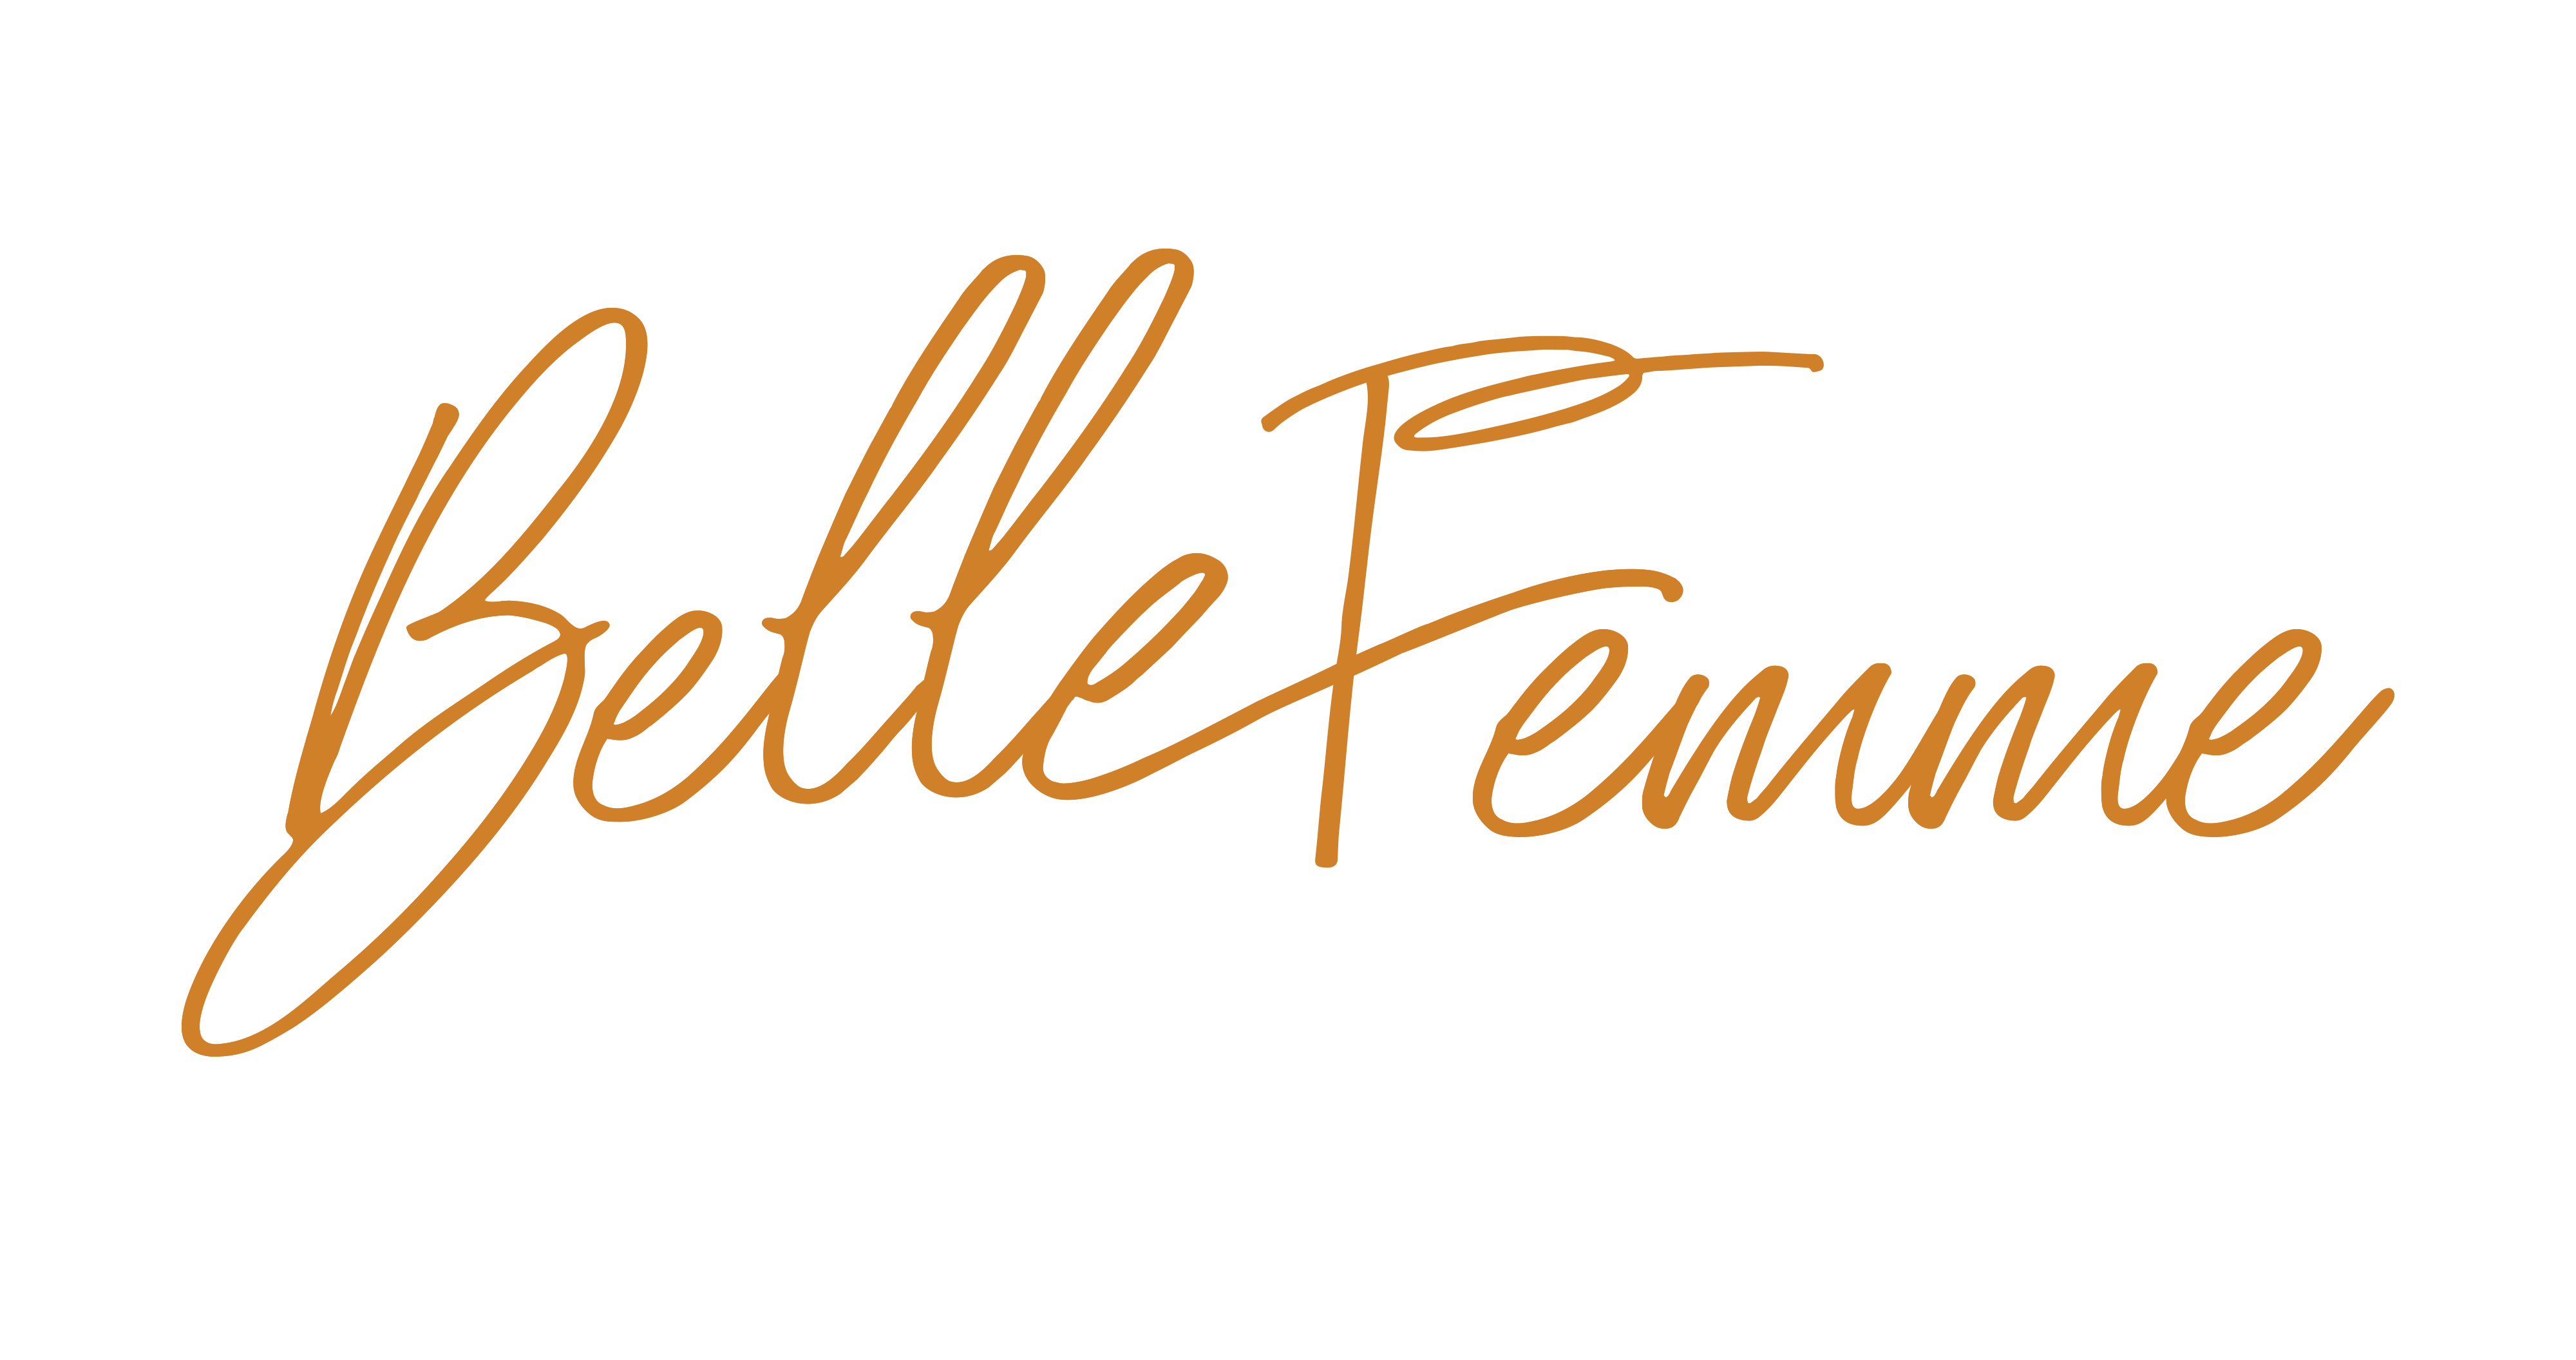 Belle Femme Couture